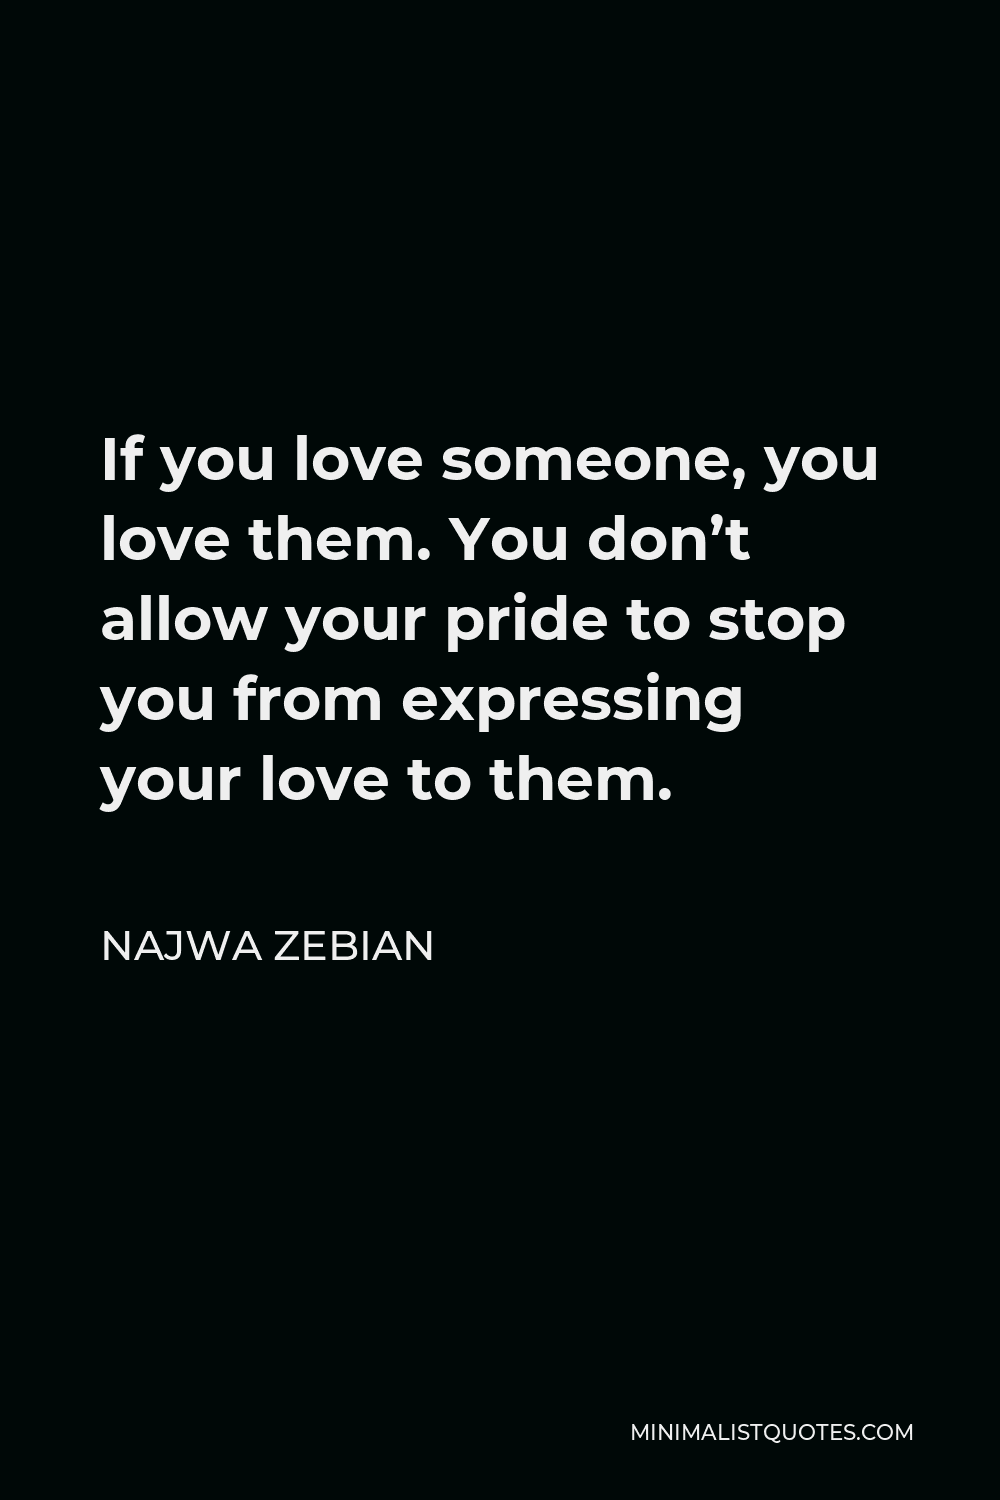 Najwa Zebian Quote - If you love someone, you love them. You don’t allow your pride to stop you from expressing your love to them.